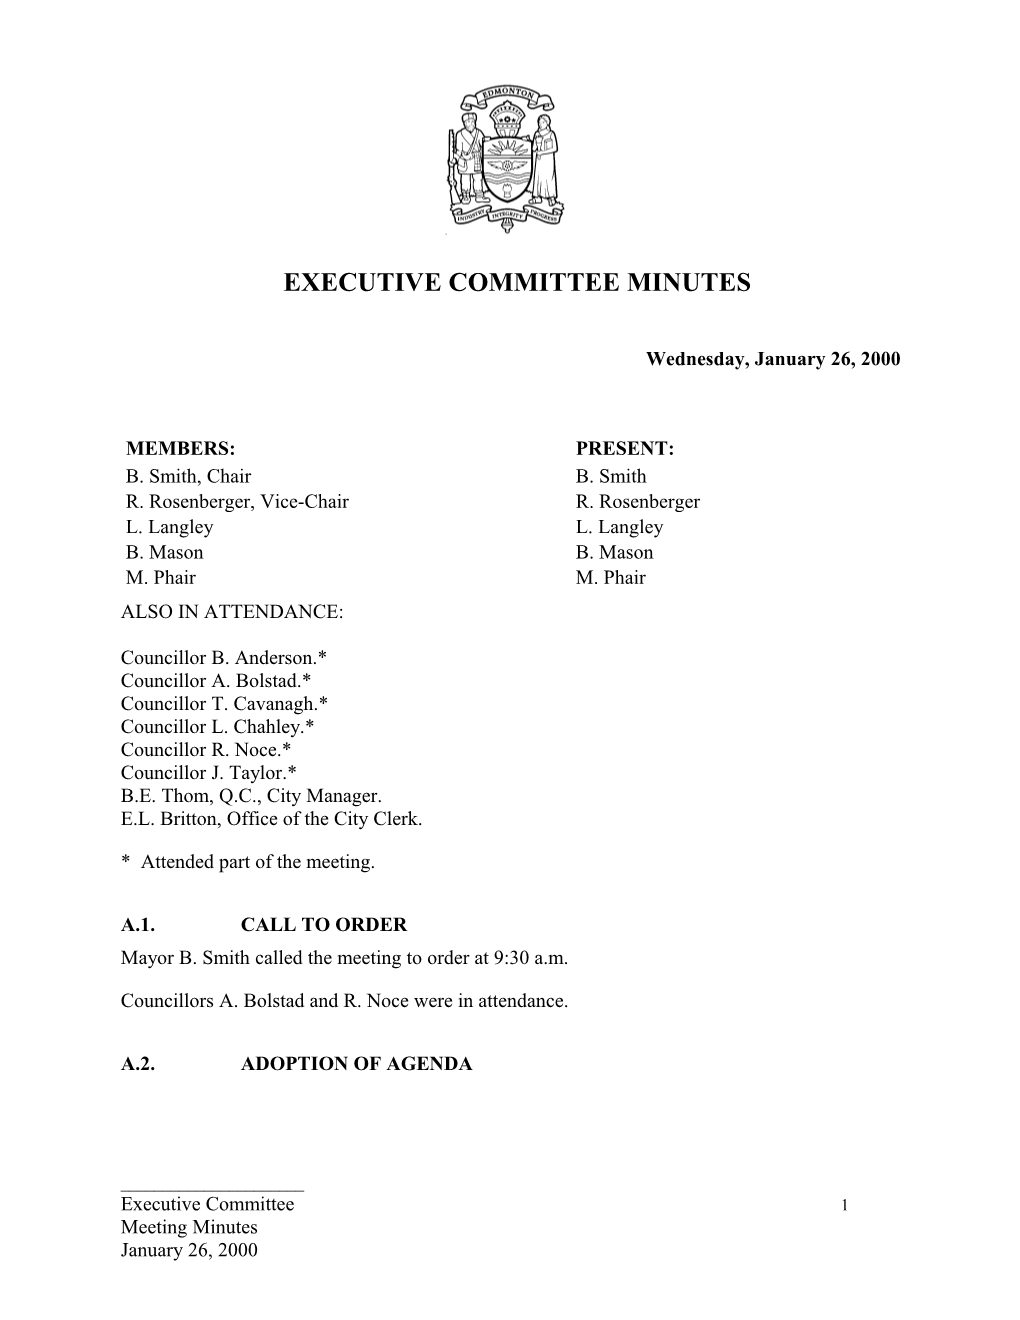 Minutes for Executive Committee January 26, 2000 Meeting